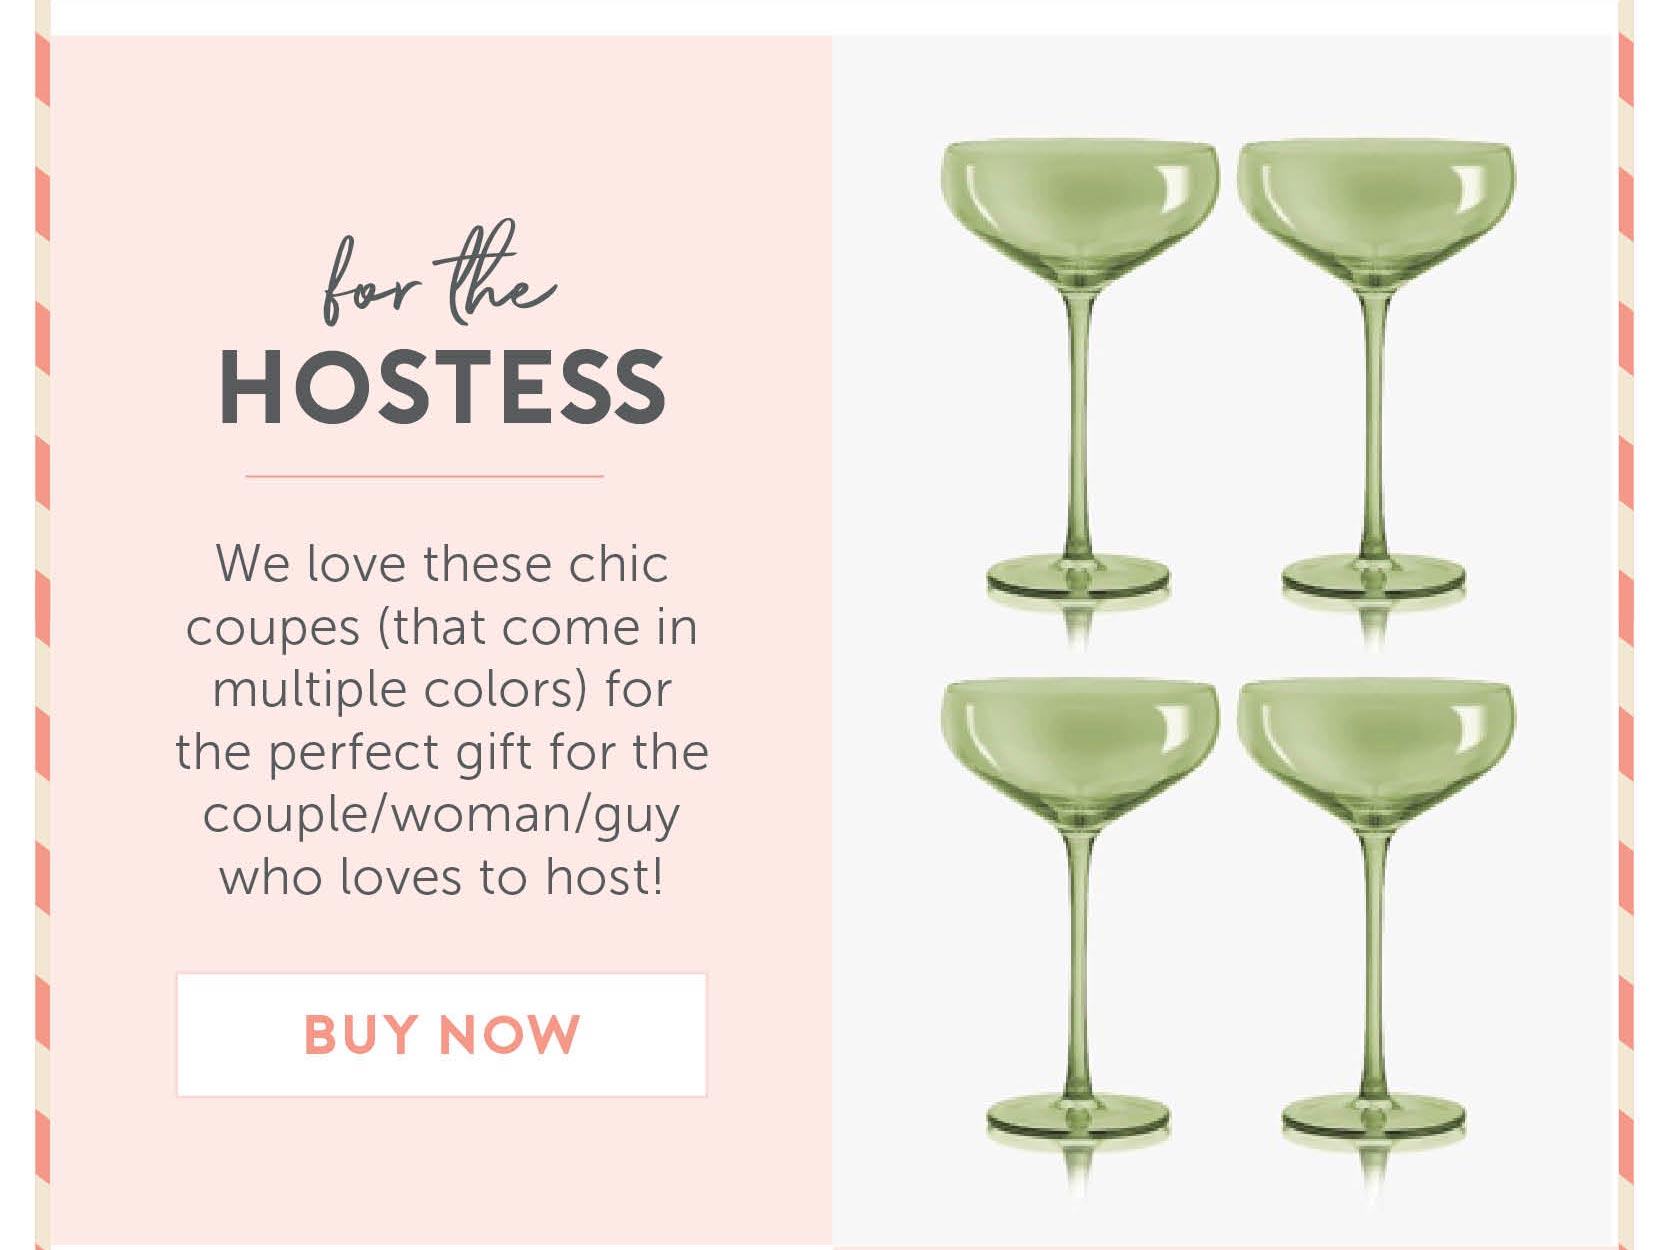 For the Hostess - We love these chic coupes (that come in multiple colors) for the perfect gift for the couple/woman/guy who loves to host!